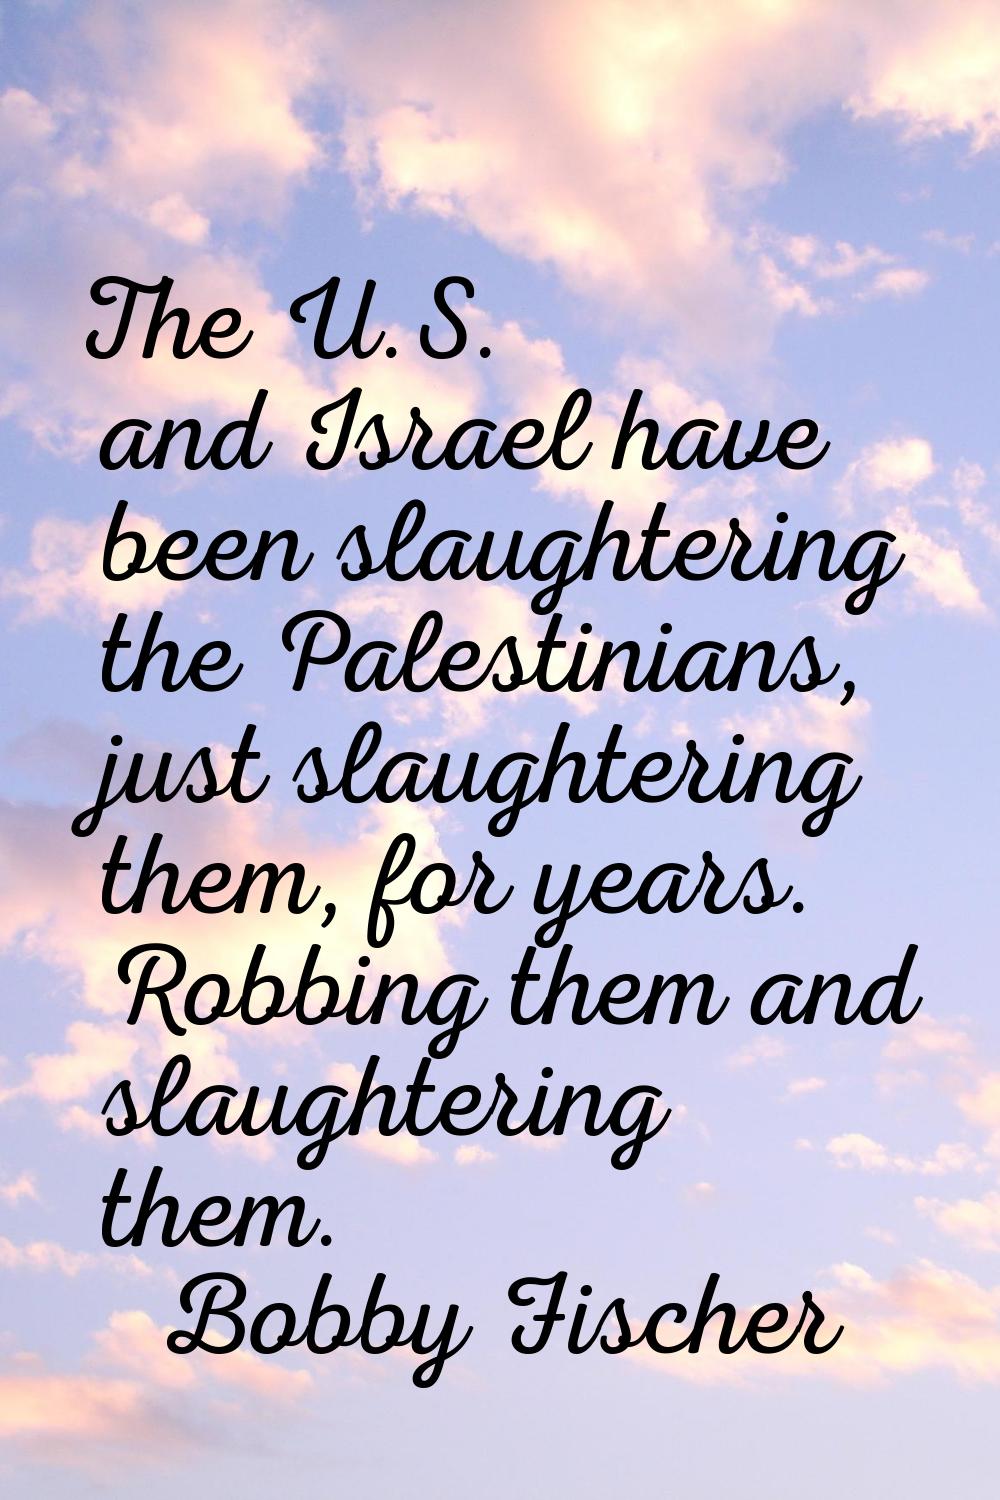 The U.S. and Israel have been slaughtering the Palestinians, just slaughtering them, for years. Rob